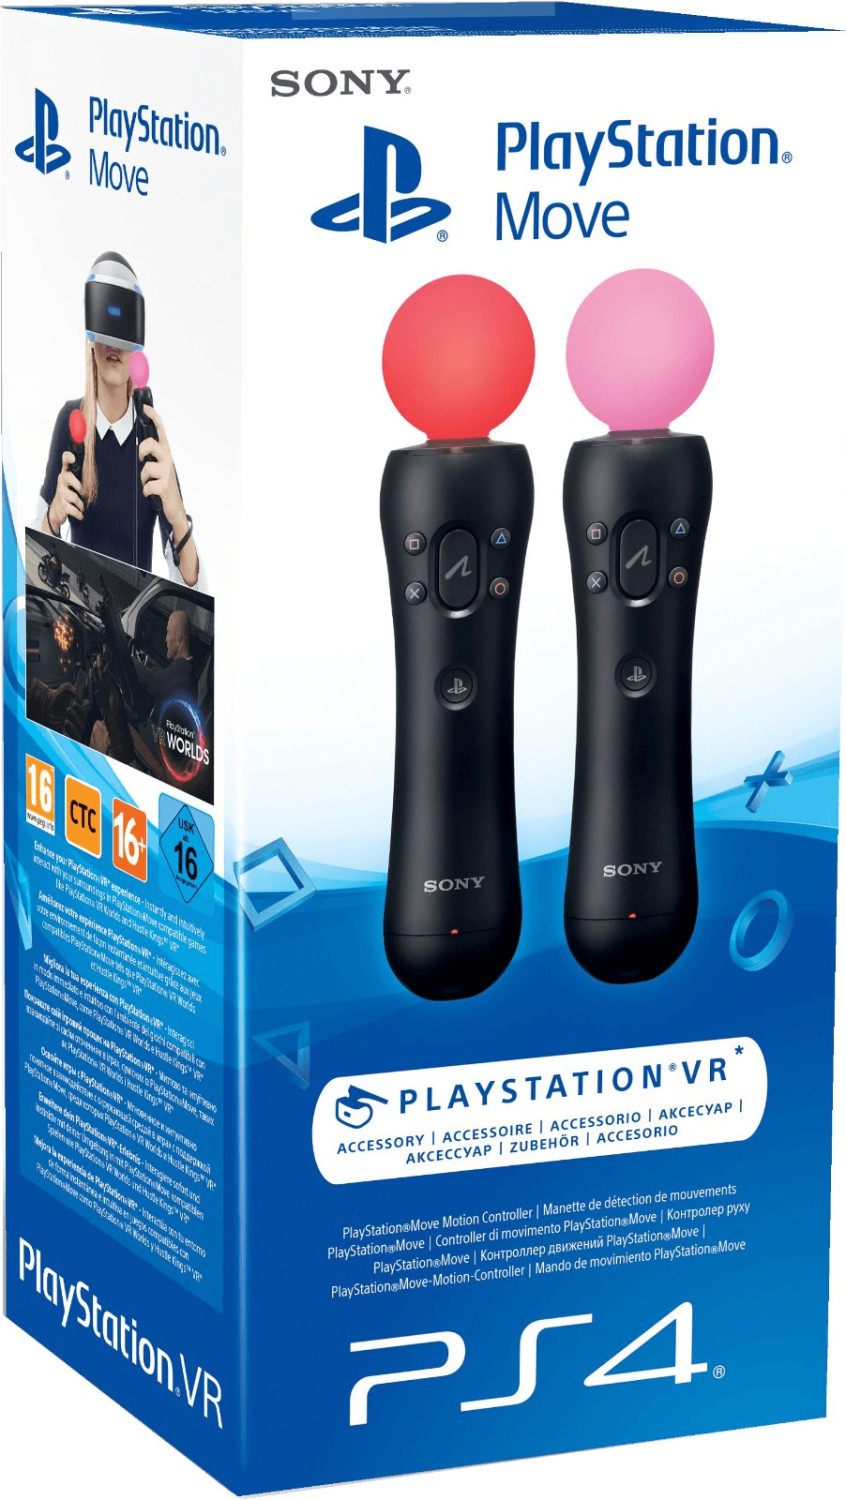 Specialisere crack Forblive Buy Sony PlayStation Move Motion Controller Twin Pack from £105.99 (Today)  – Best Deals on idealo.co.uk